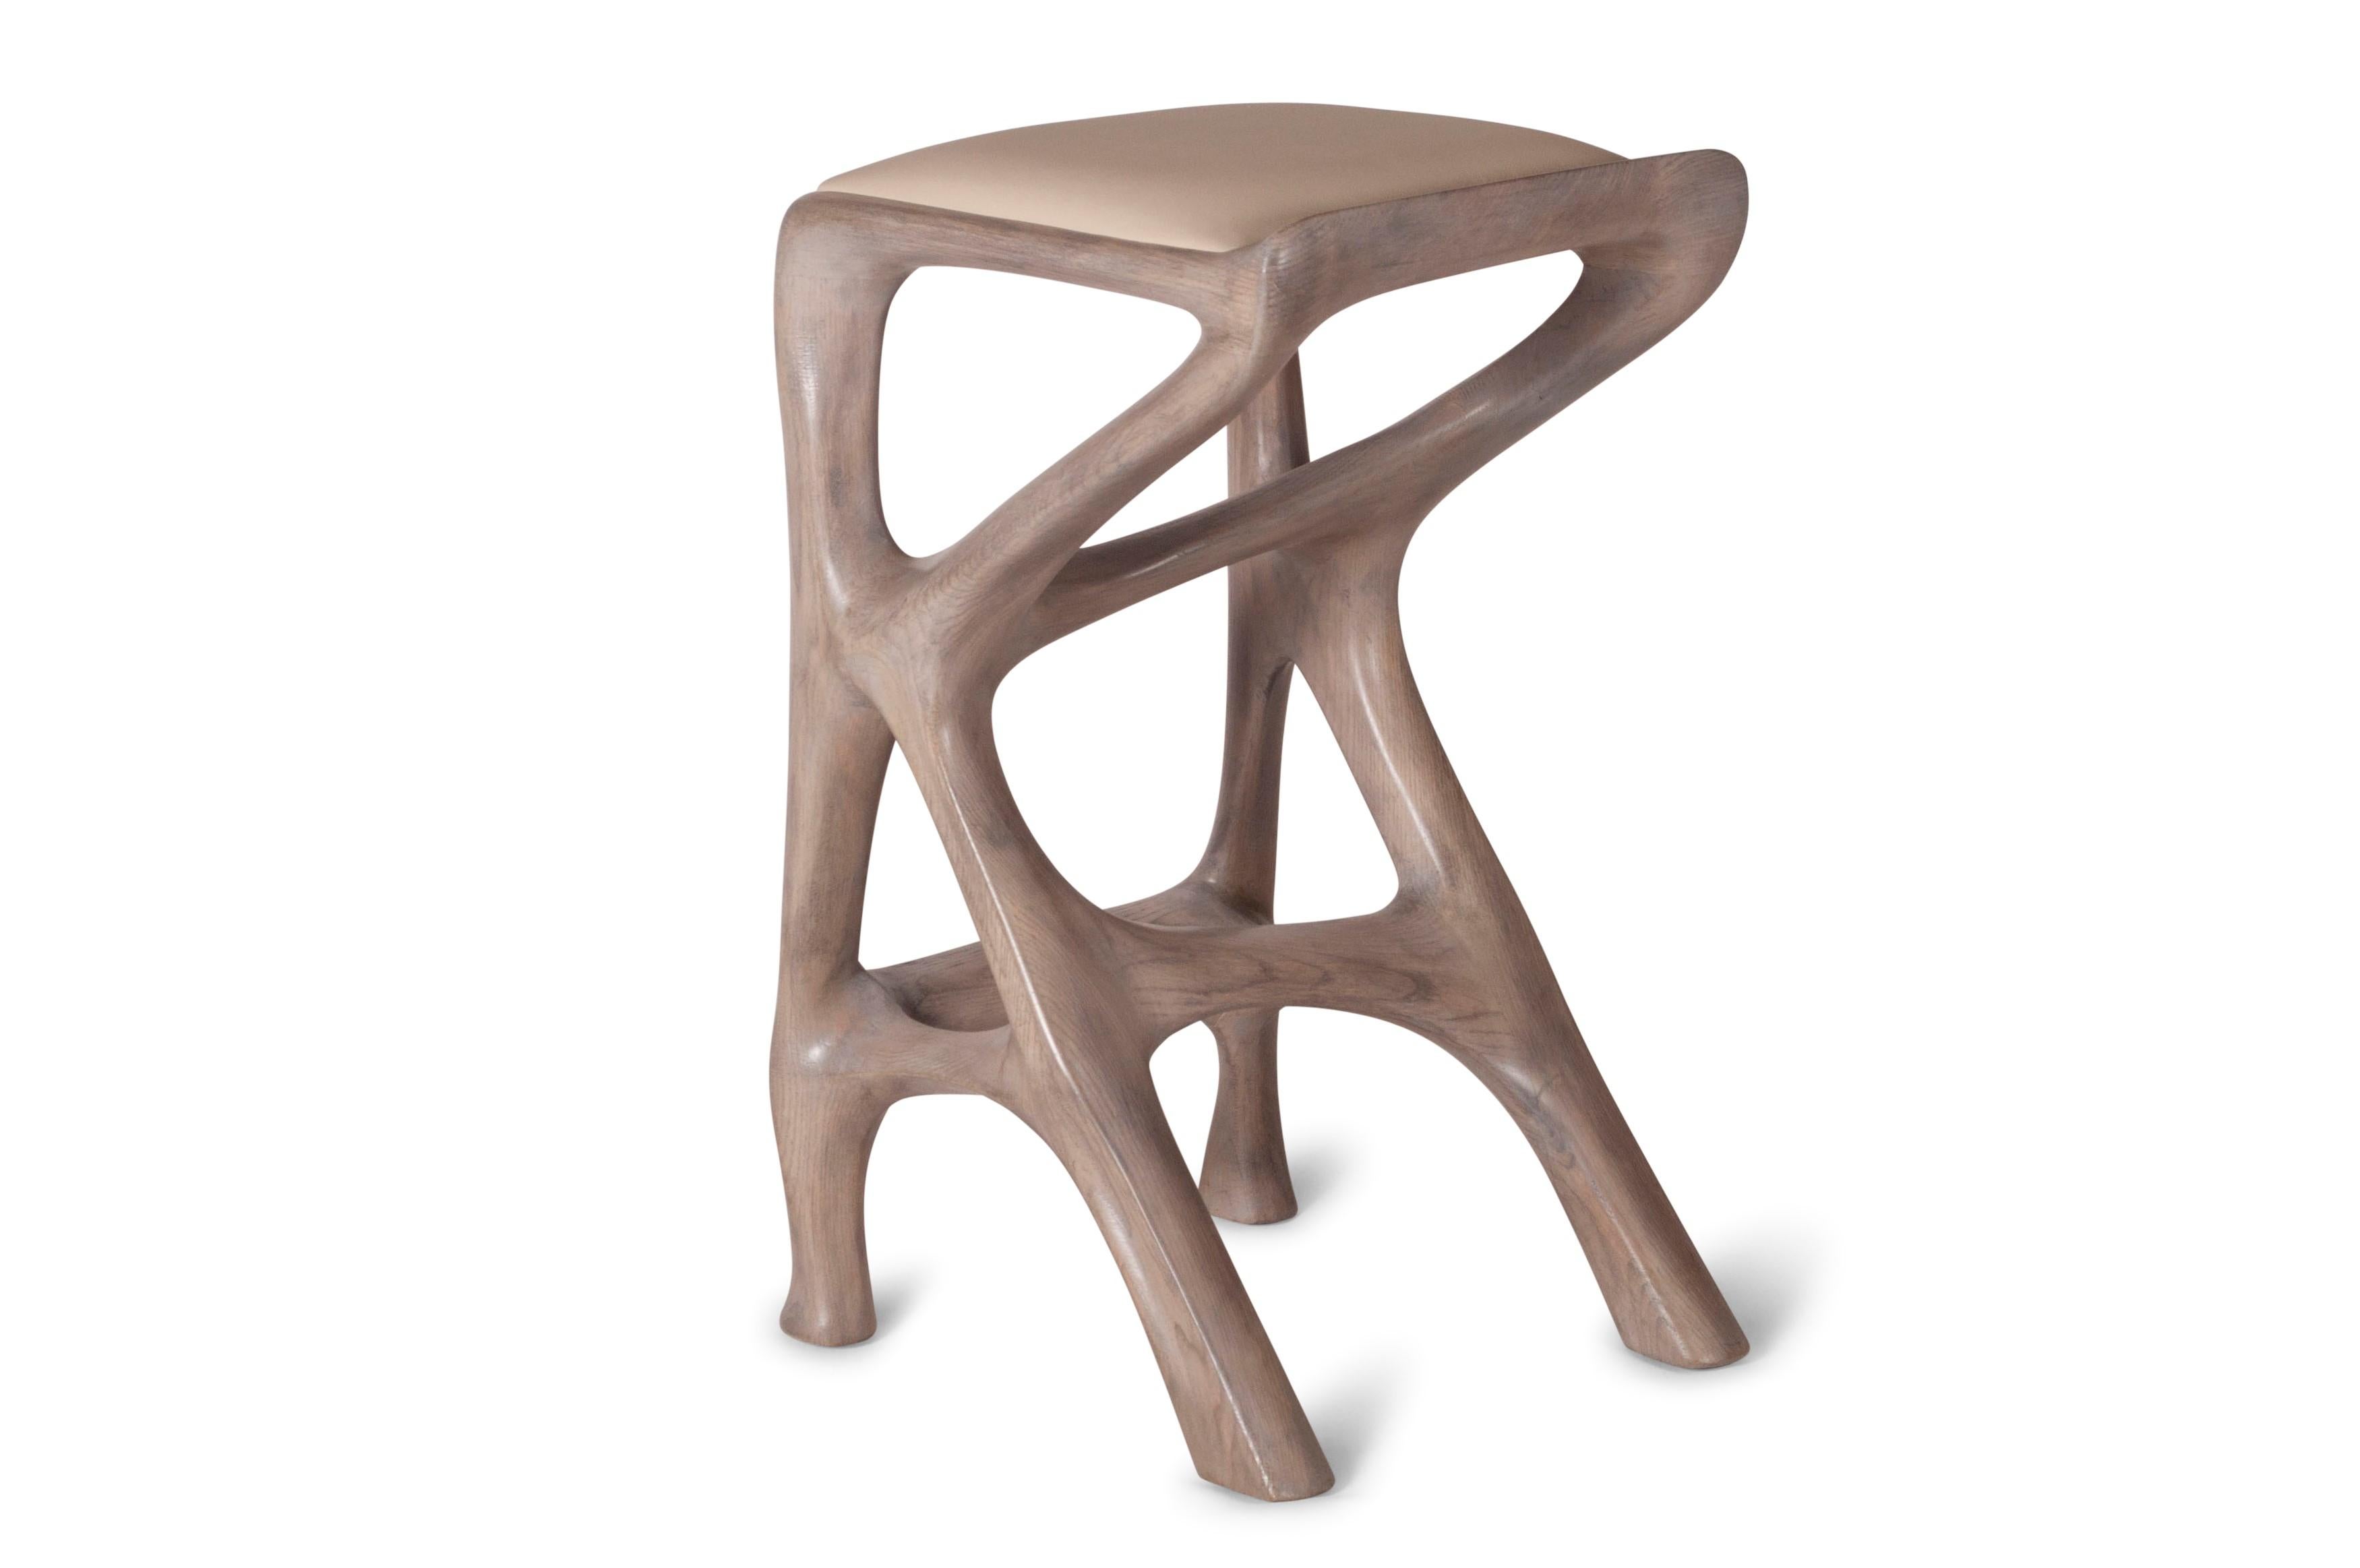 American Amorph Chimera Bar Stool in Gray Oak stain on Ash wood counter height For Sale